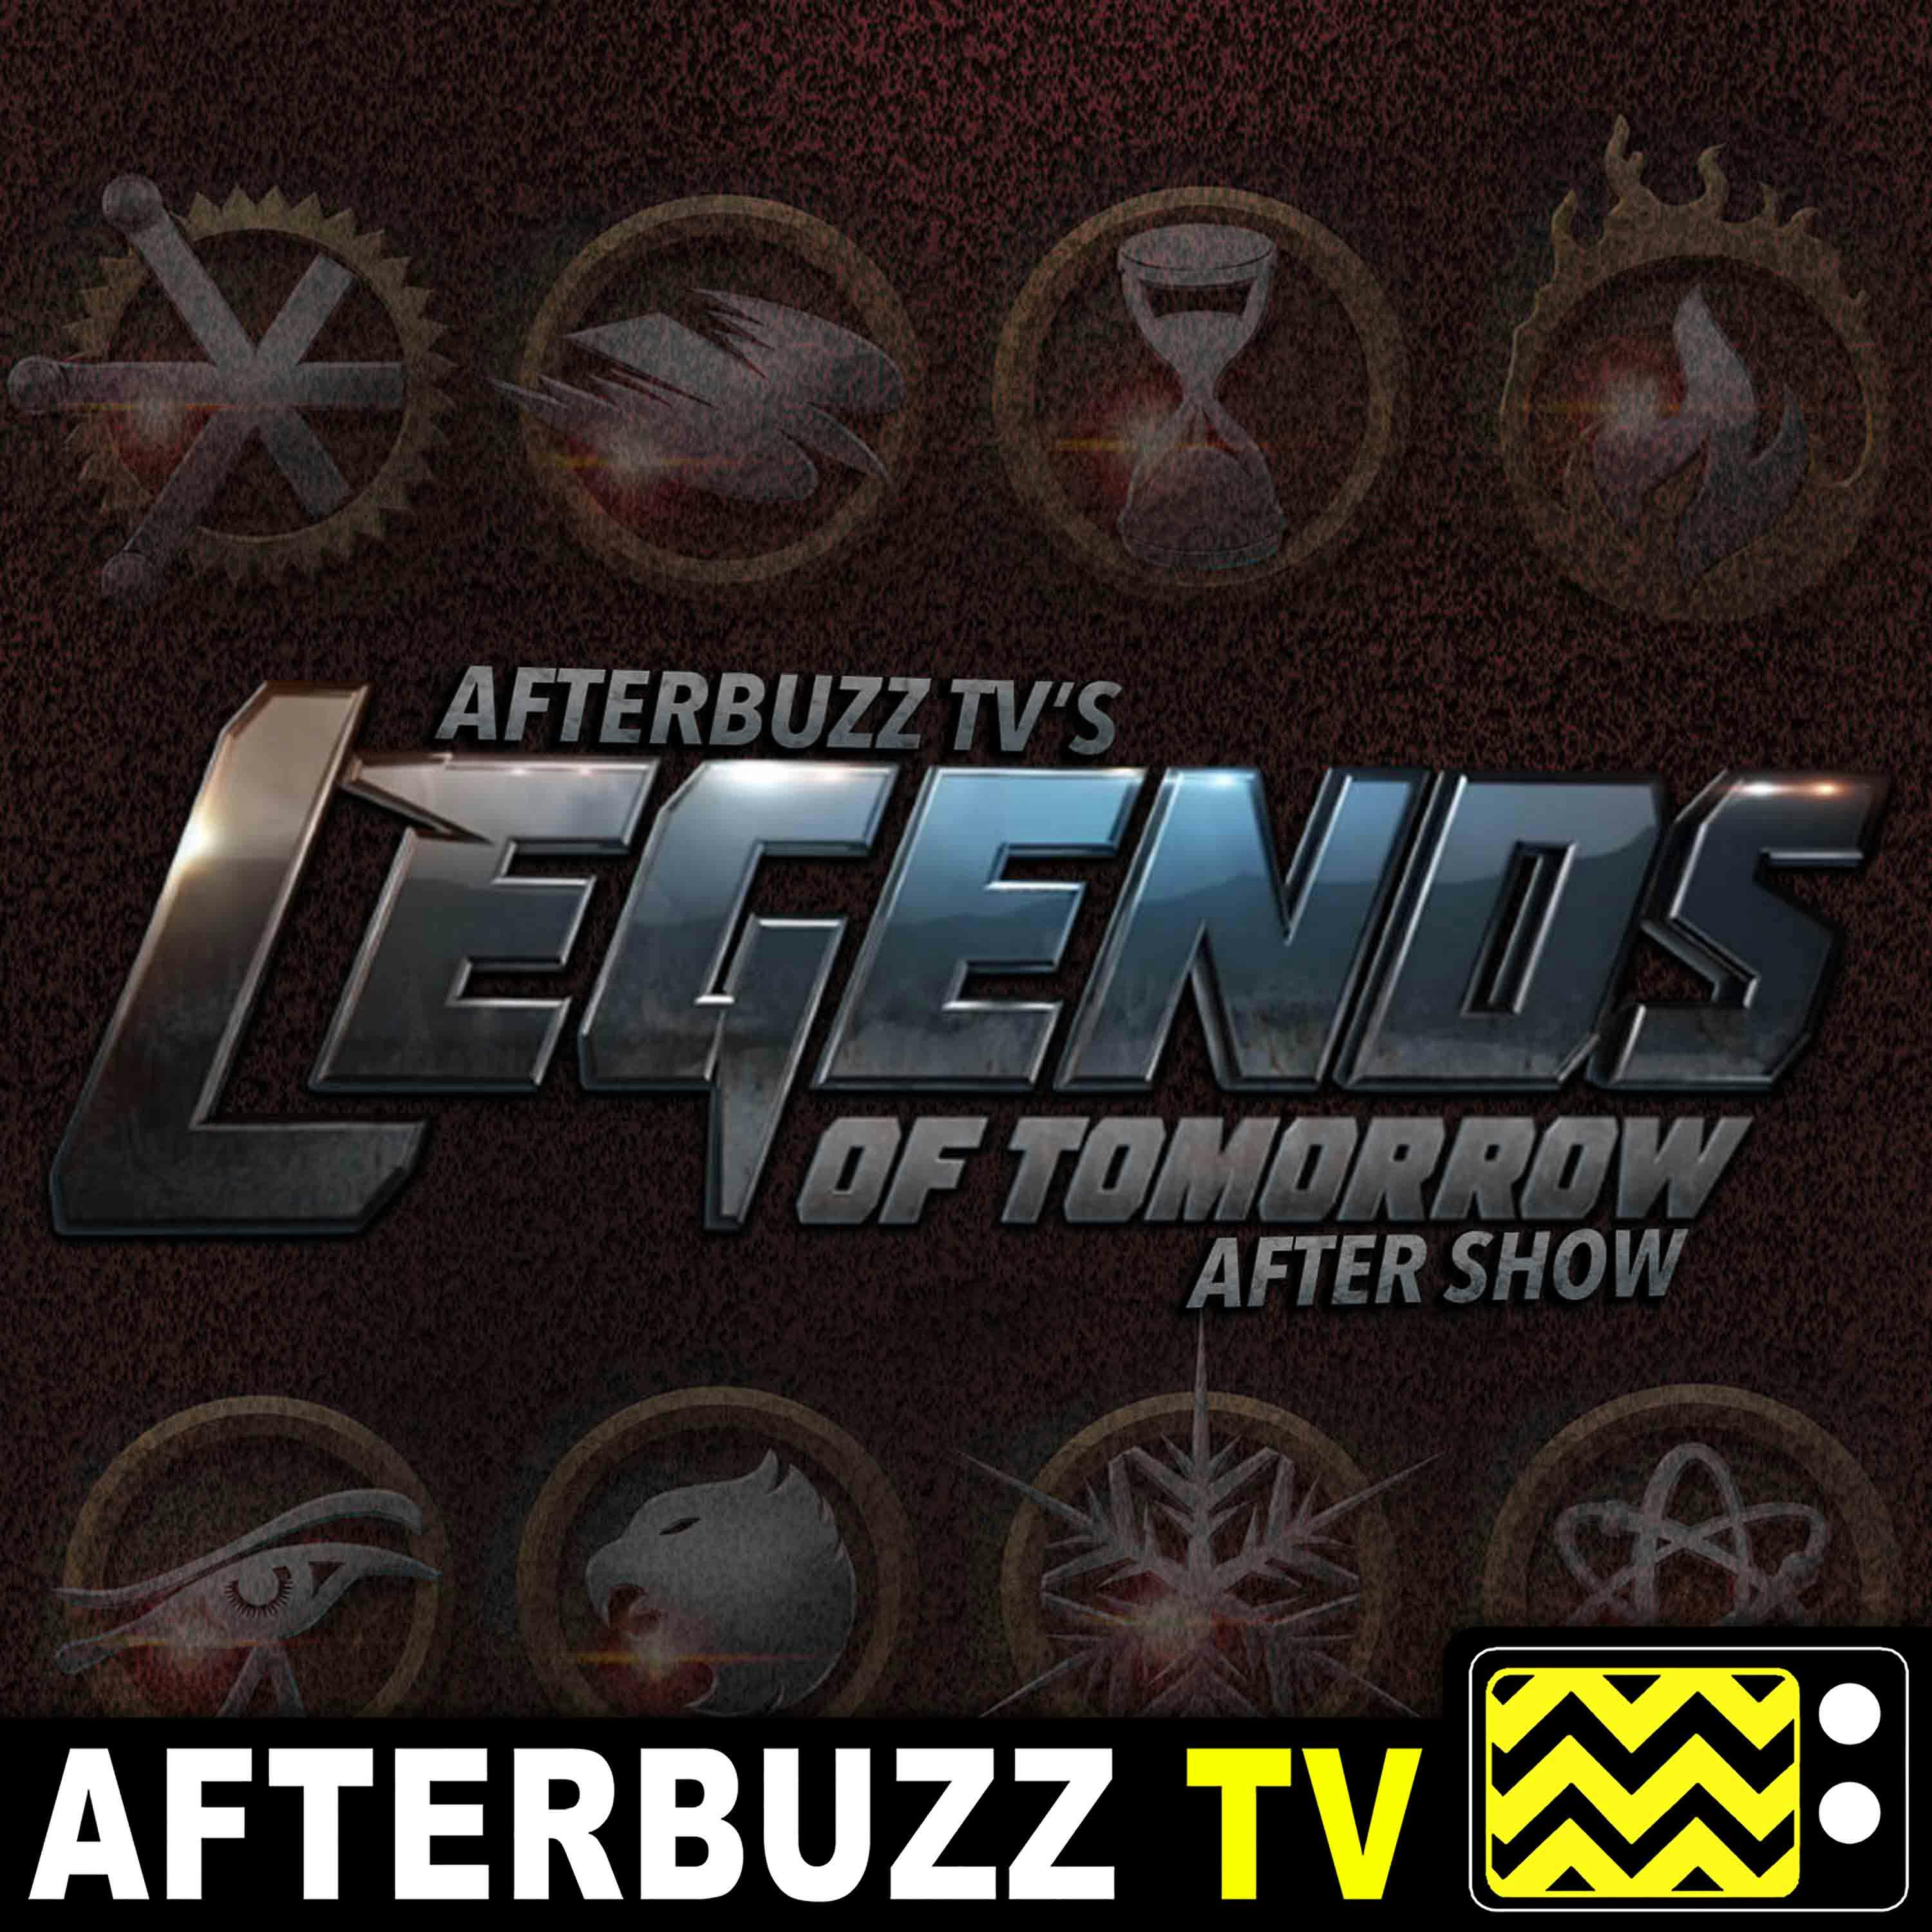 Legends Of Tomorrow S:3 | Here I Go Again E:11 | AfterBuzz TV AfterShow